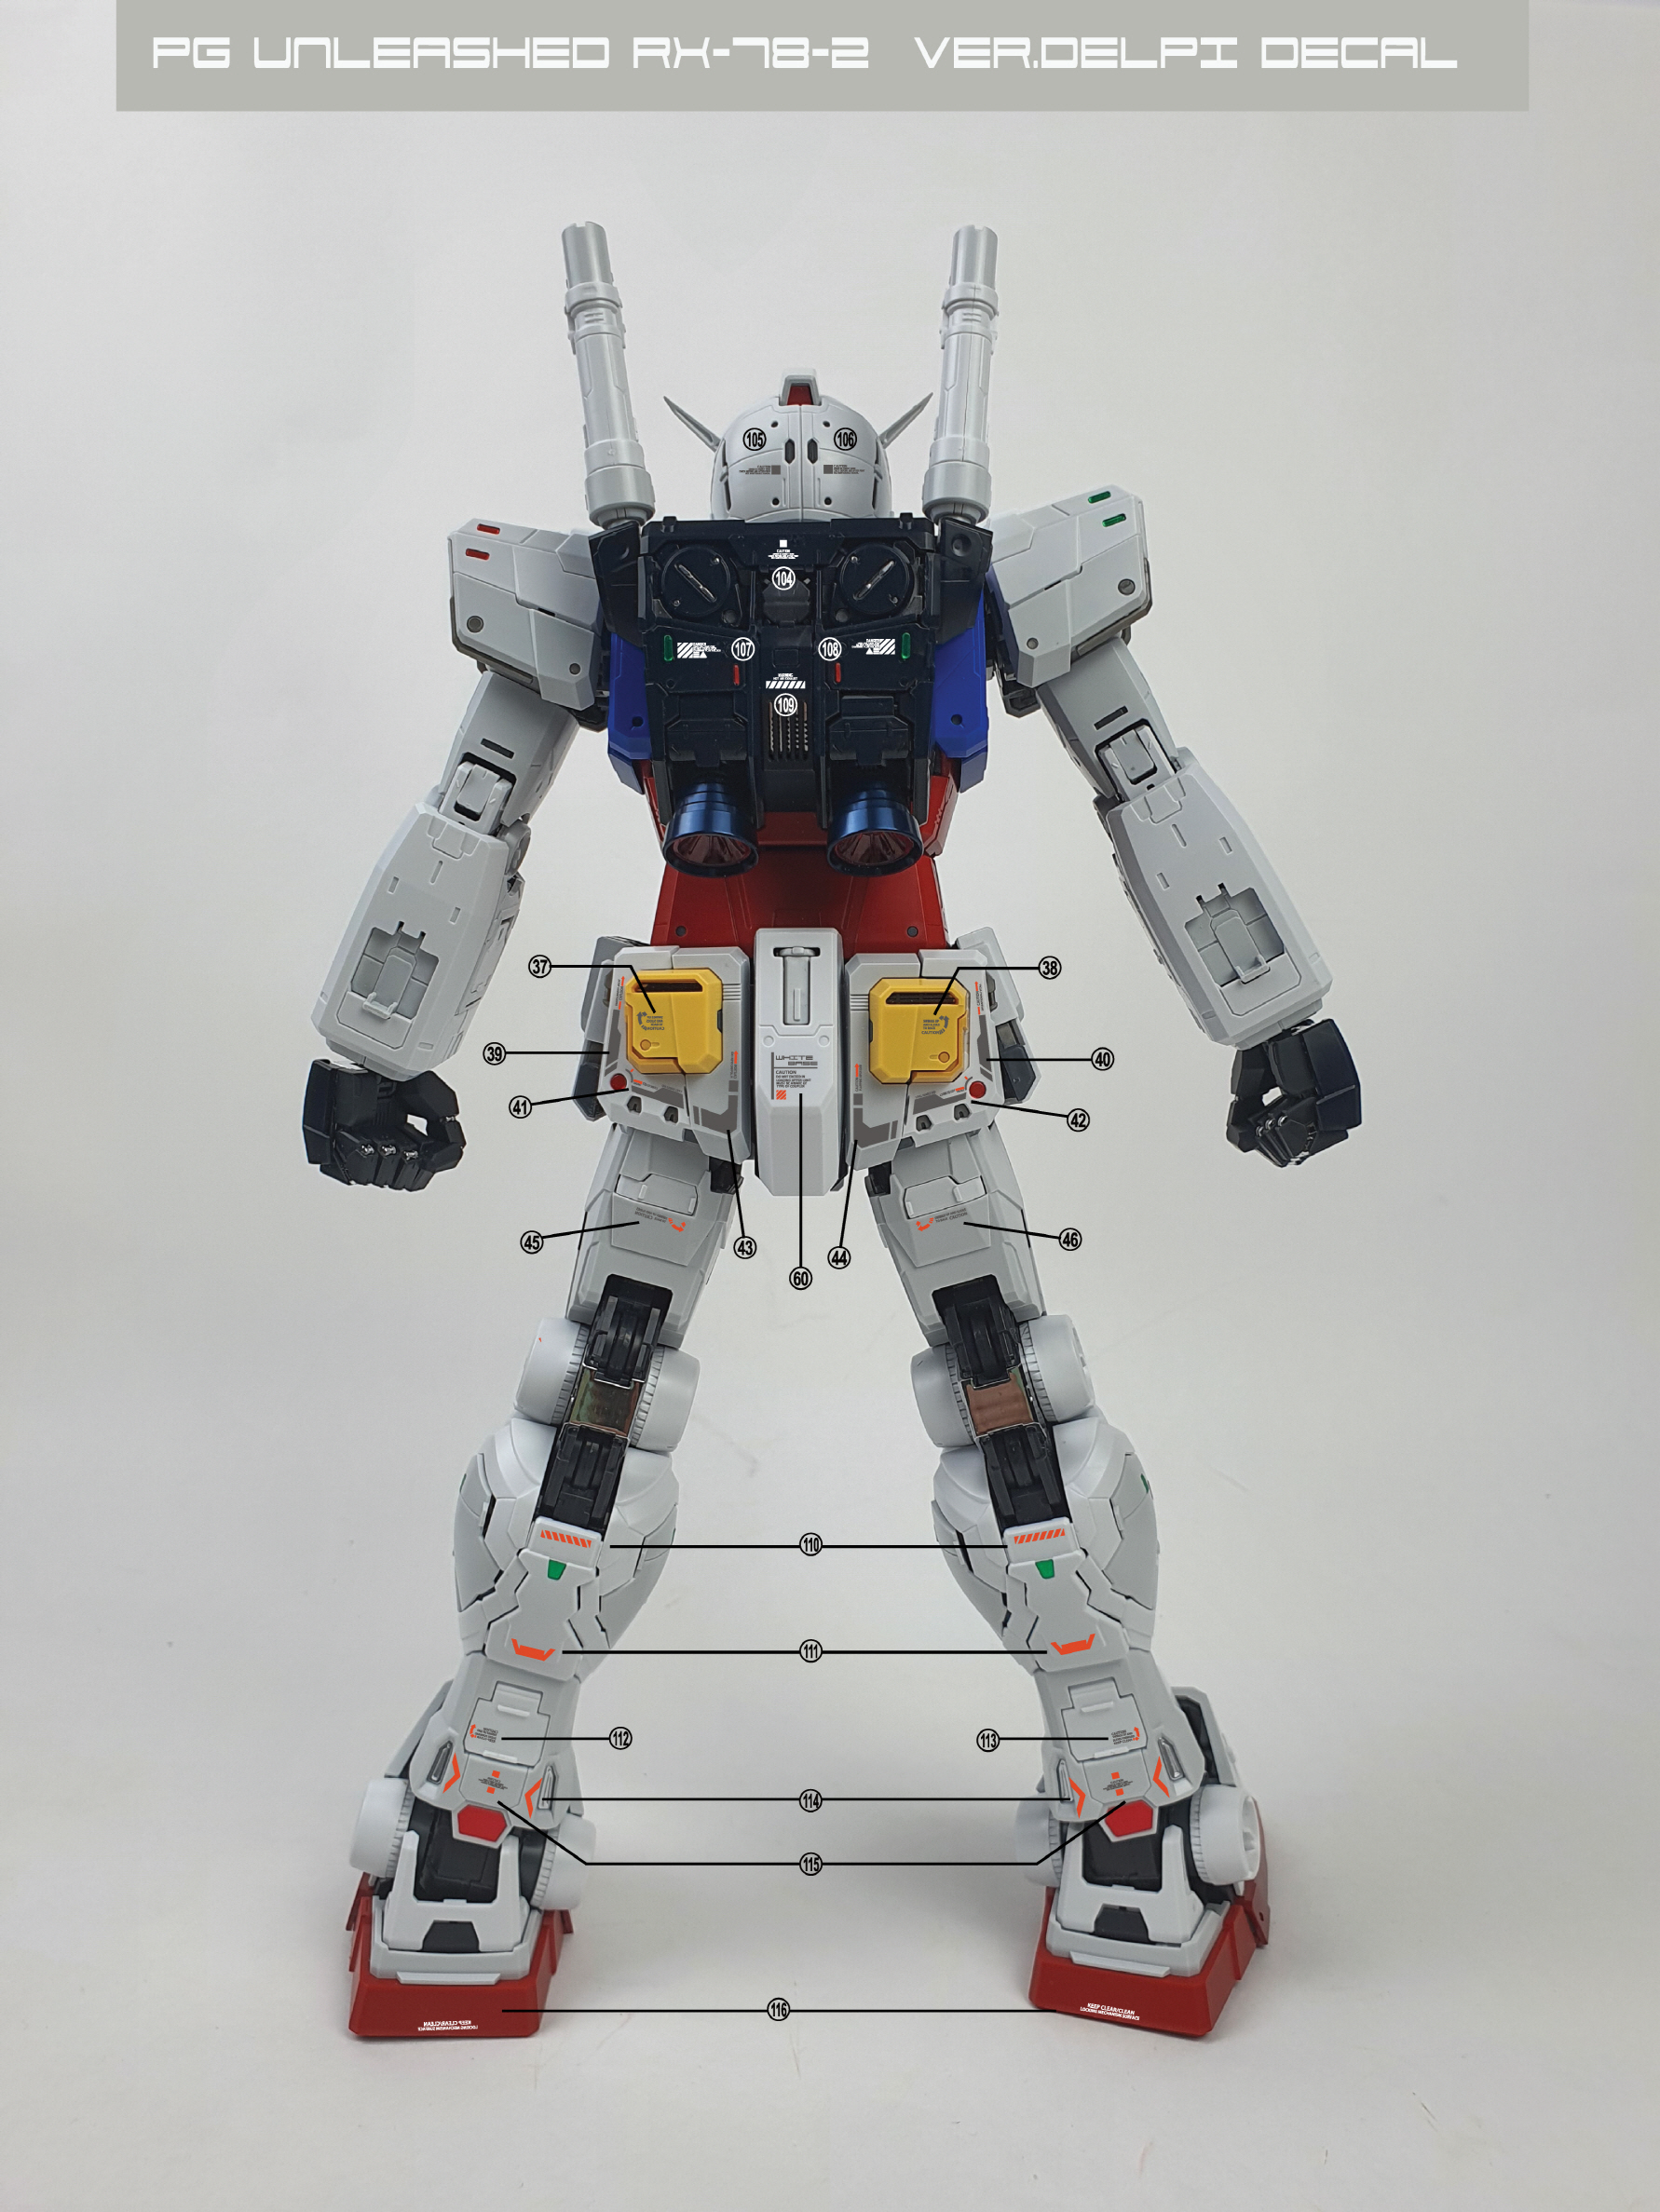 Pg Unleashed Rx 78 2 Ver Delpi Water Decal Delpidecal